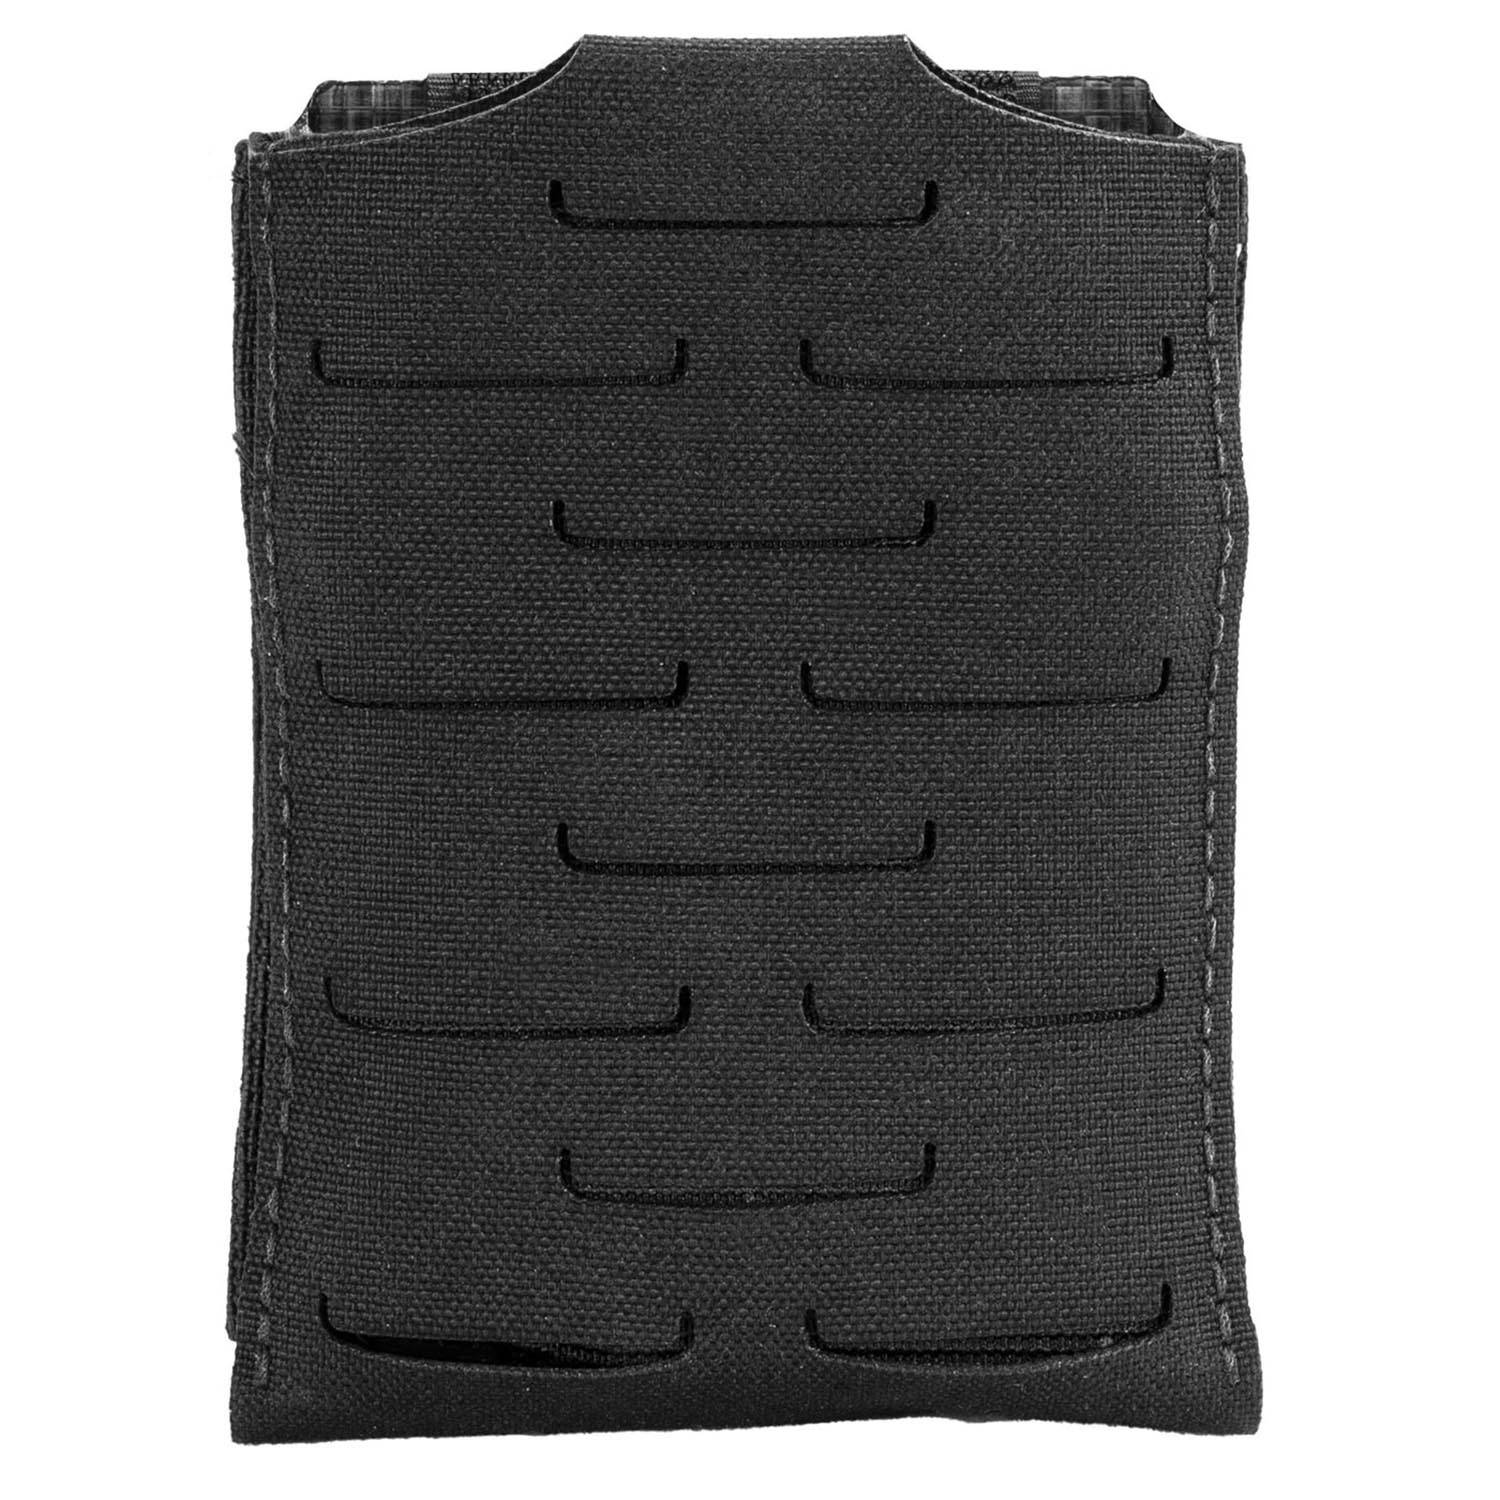 POINT BLANK SINGLE RIFLE MAG POUCH WITH TANK TRACK